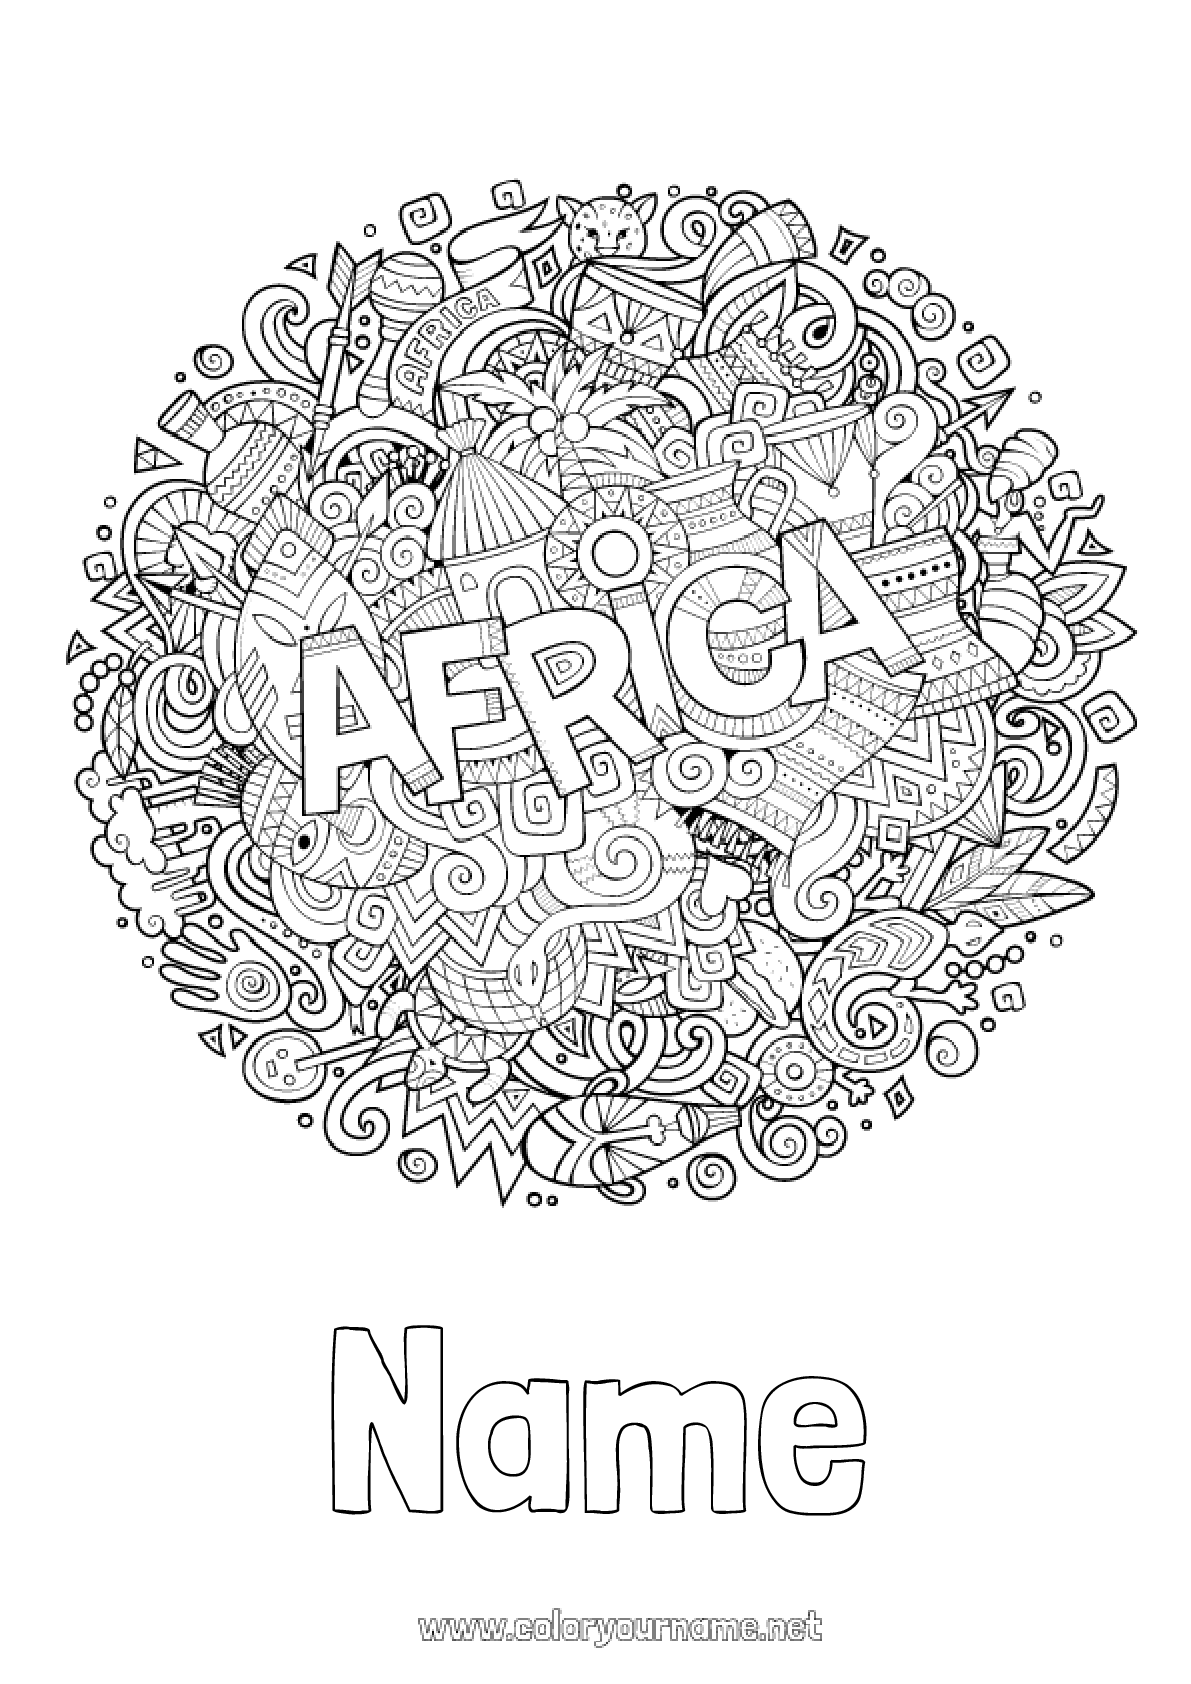 coloring-page-no-1716-geography-symbols-complex-coloring-pages